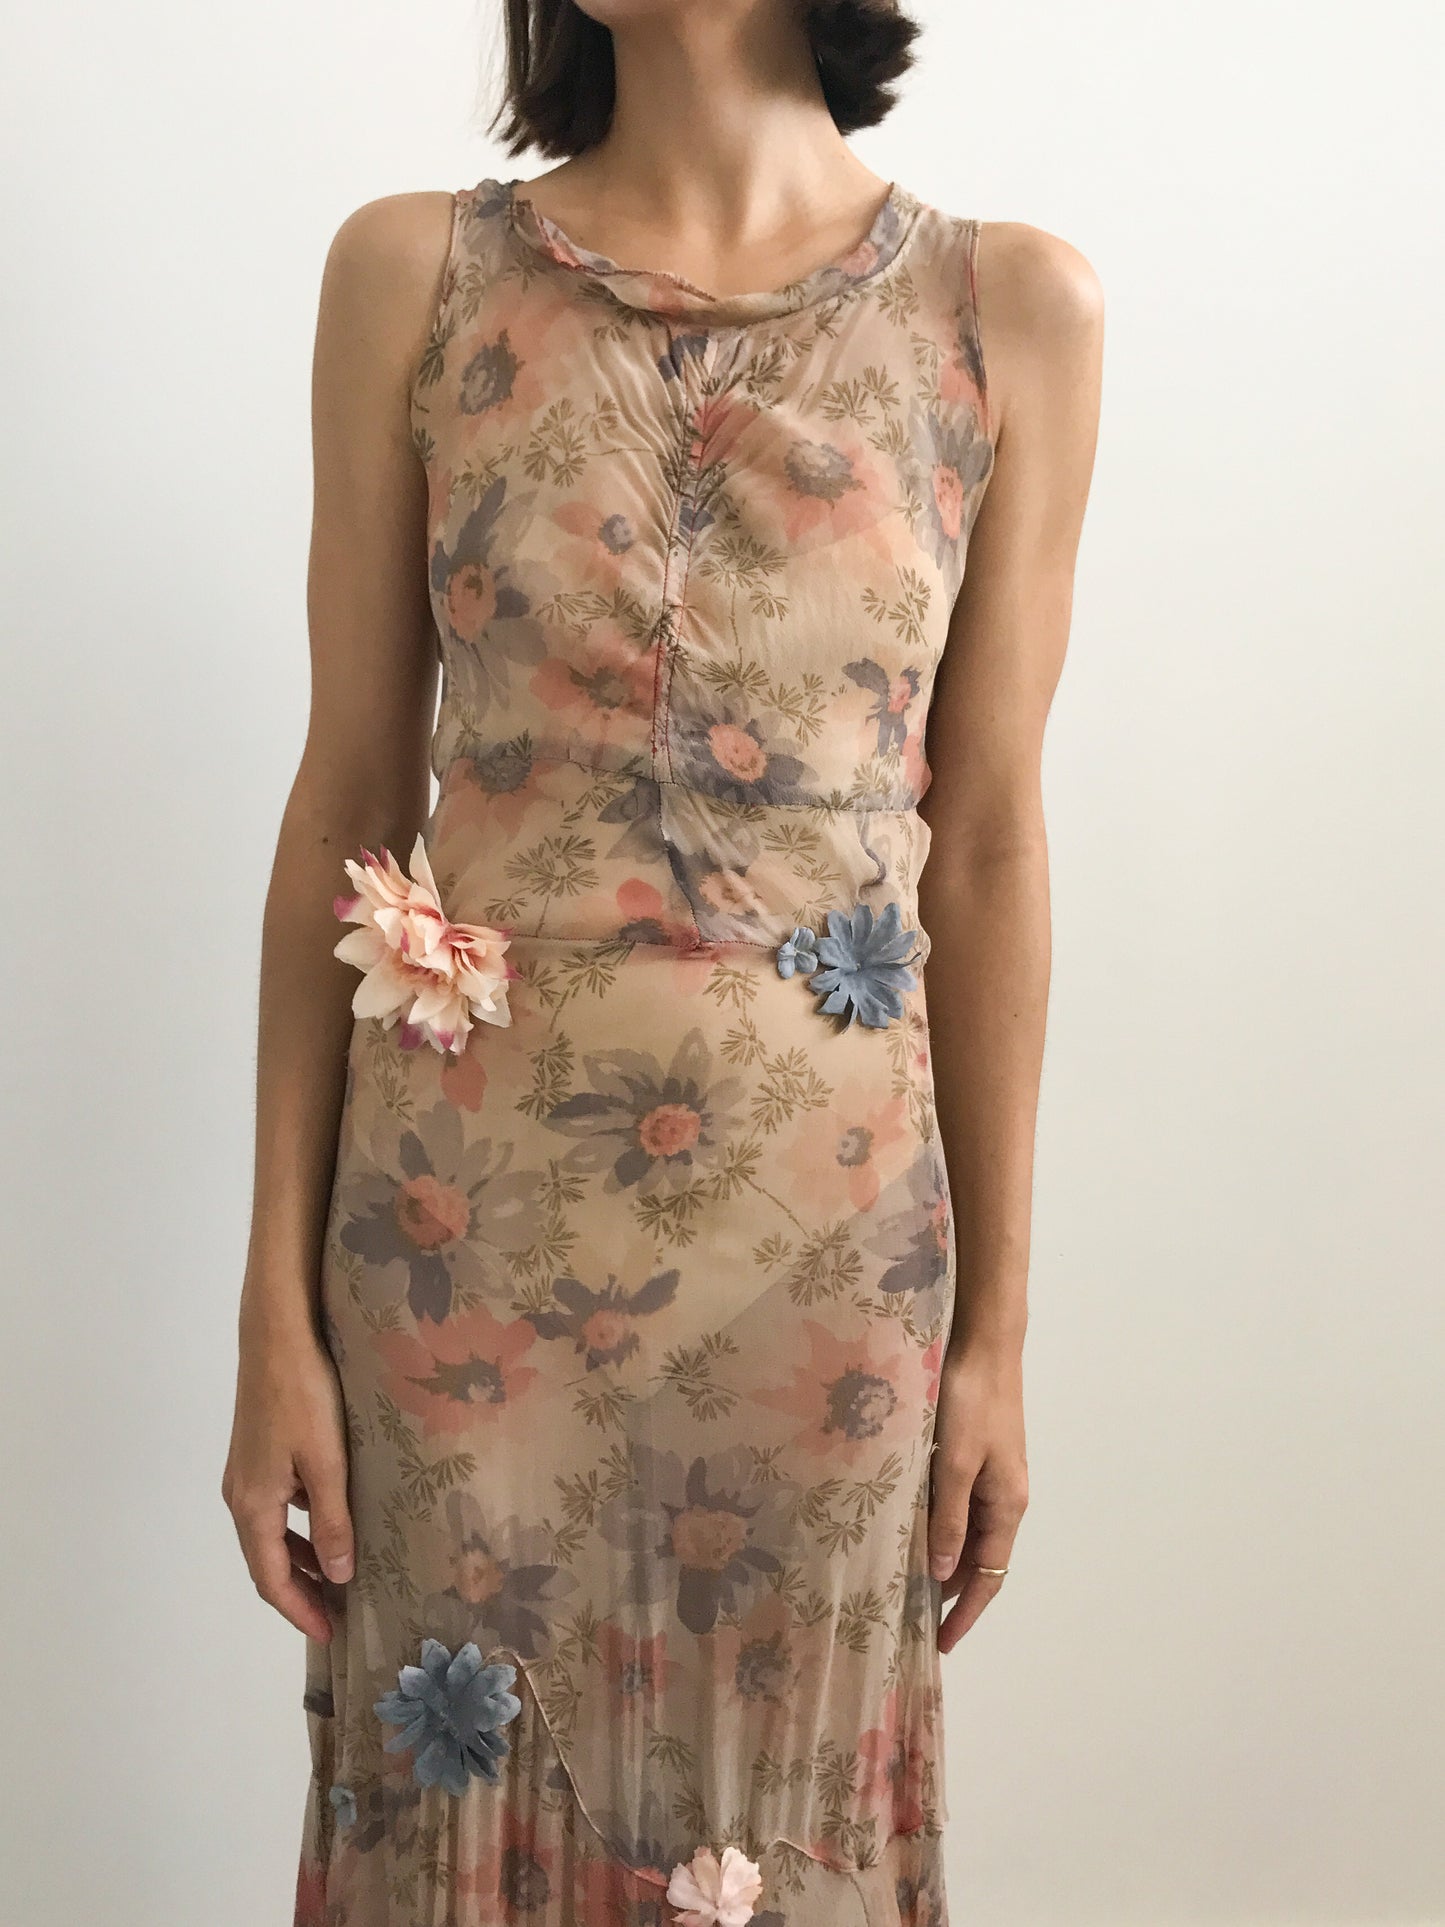 1930s Chiffon Dress with Floral Appliques